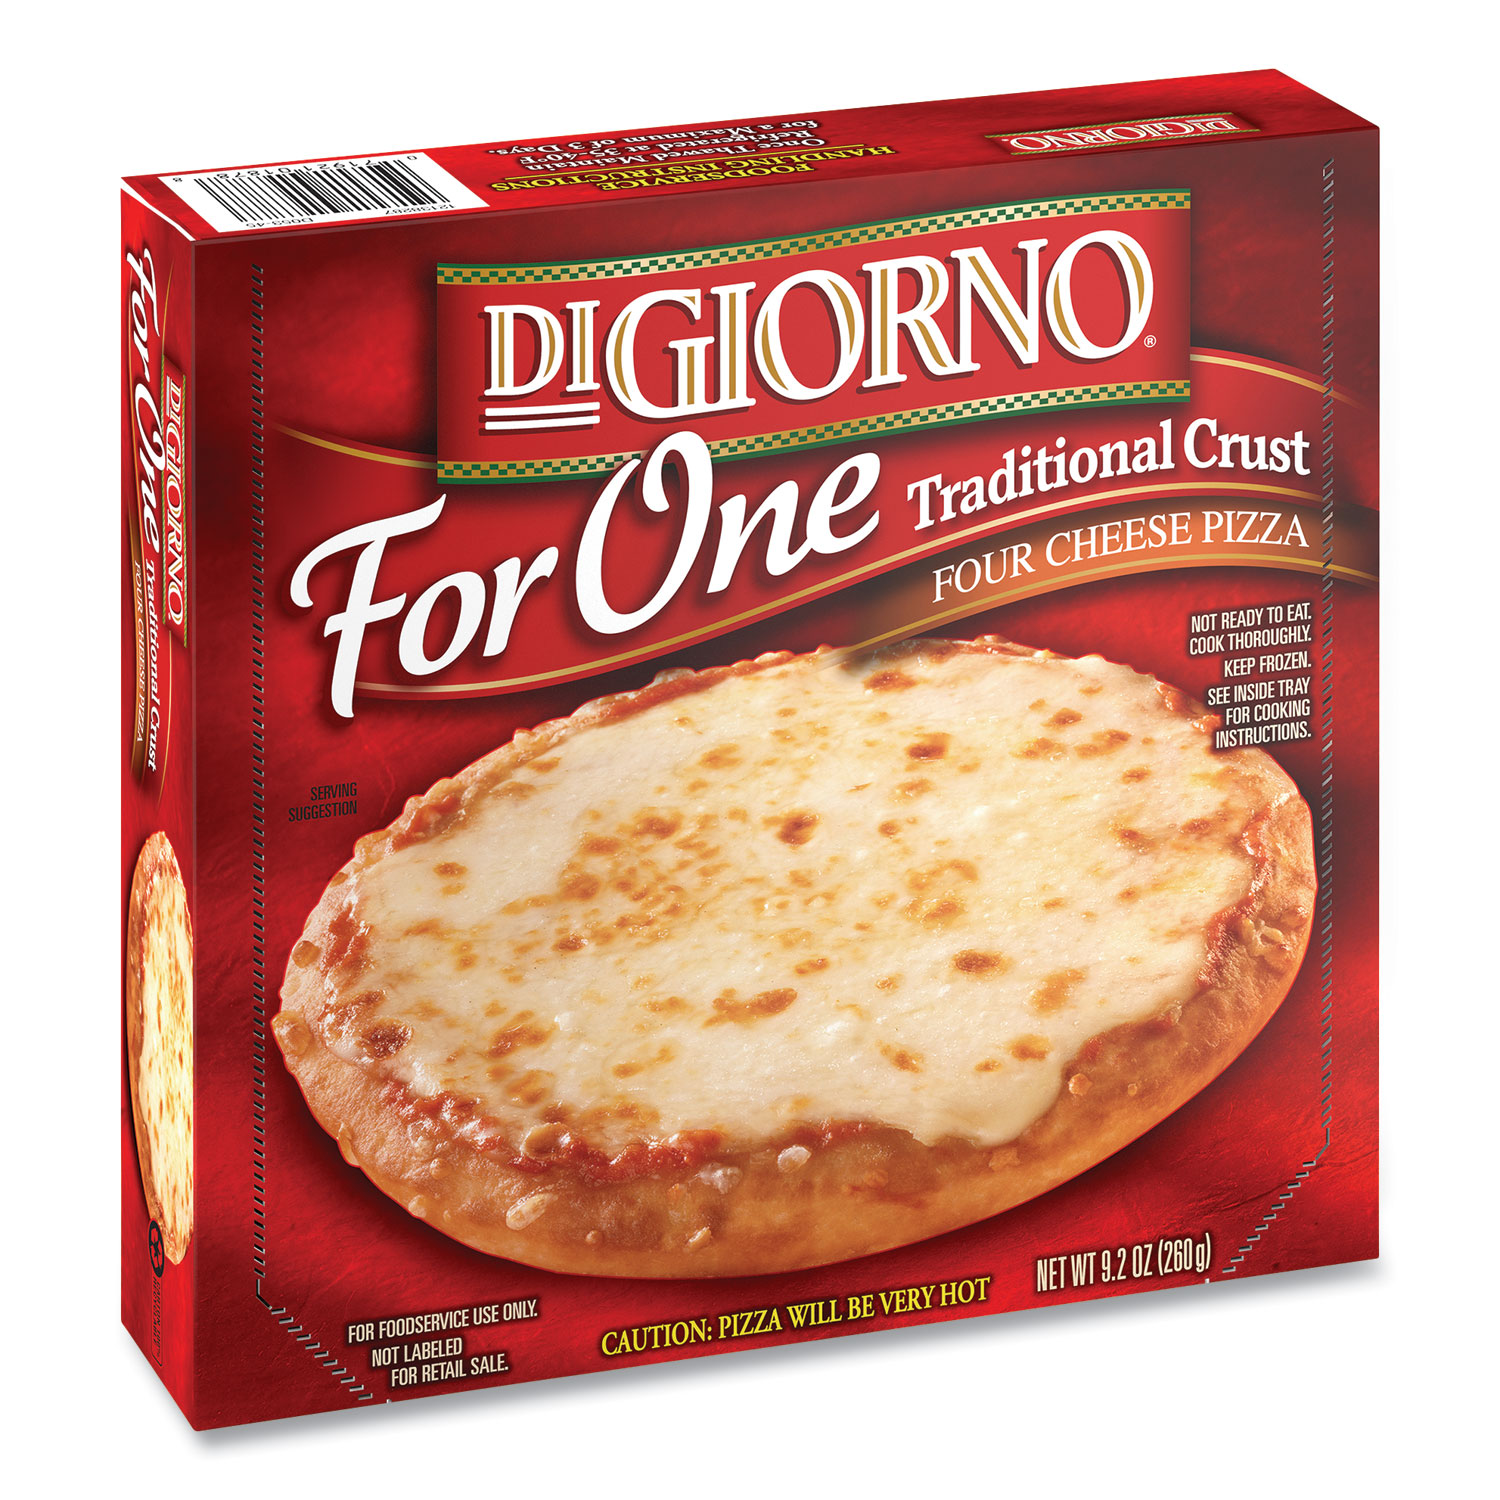  DIGIORNO 18785 For One Single Serve Traditional Crust Pizza, 9.2 oz, Four Cheese, 3/Pack, Free Delivery in 1-4 Business Days (GRR90300120) 